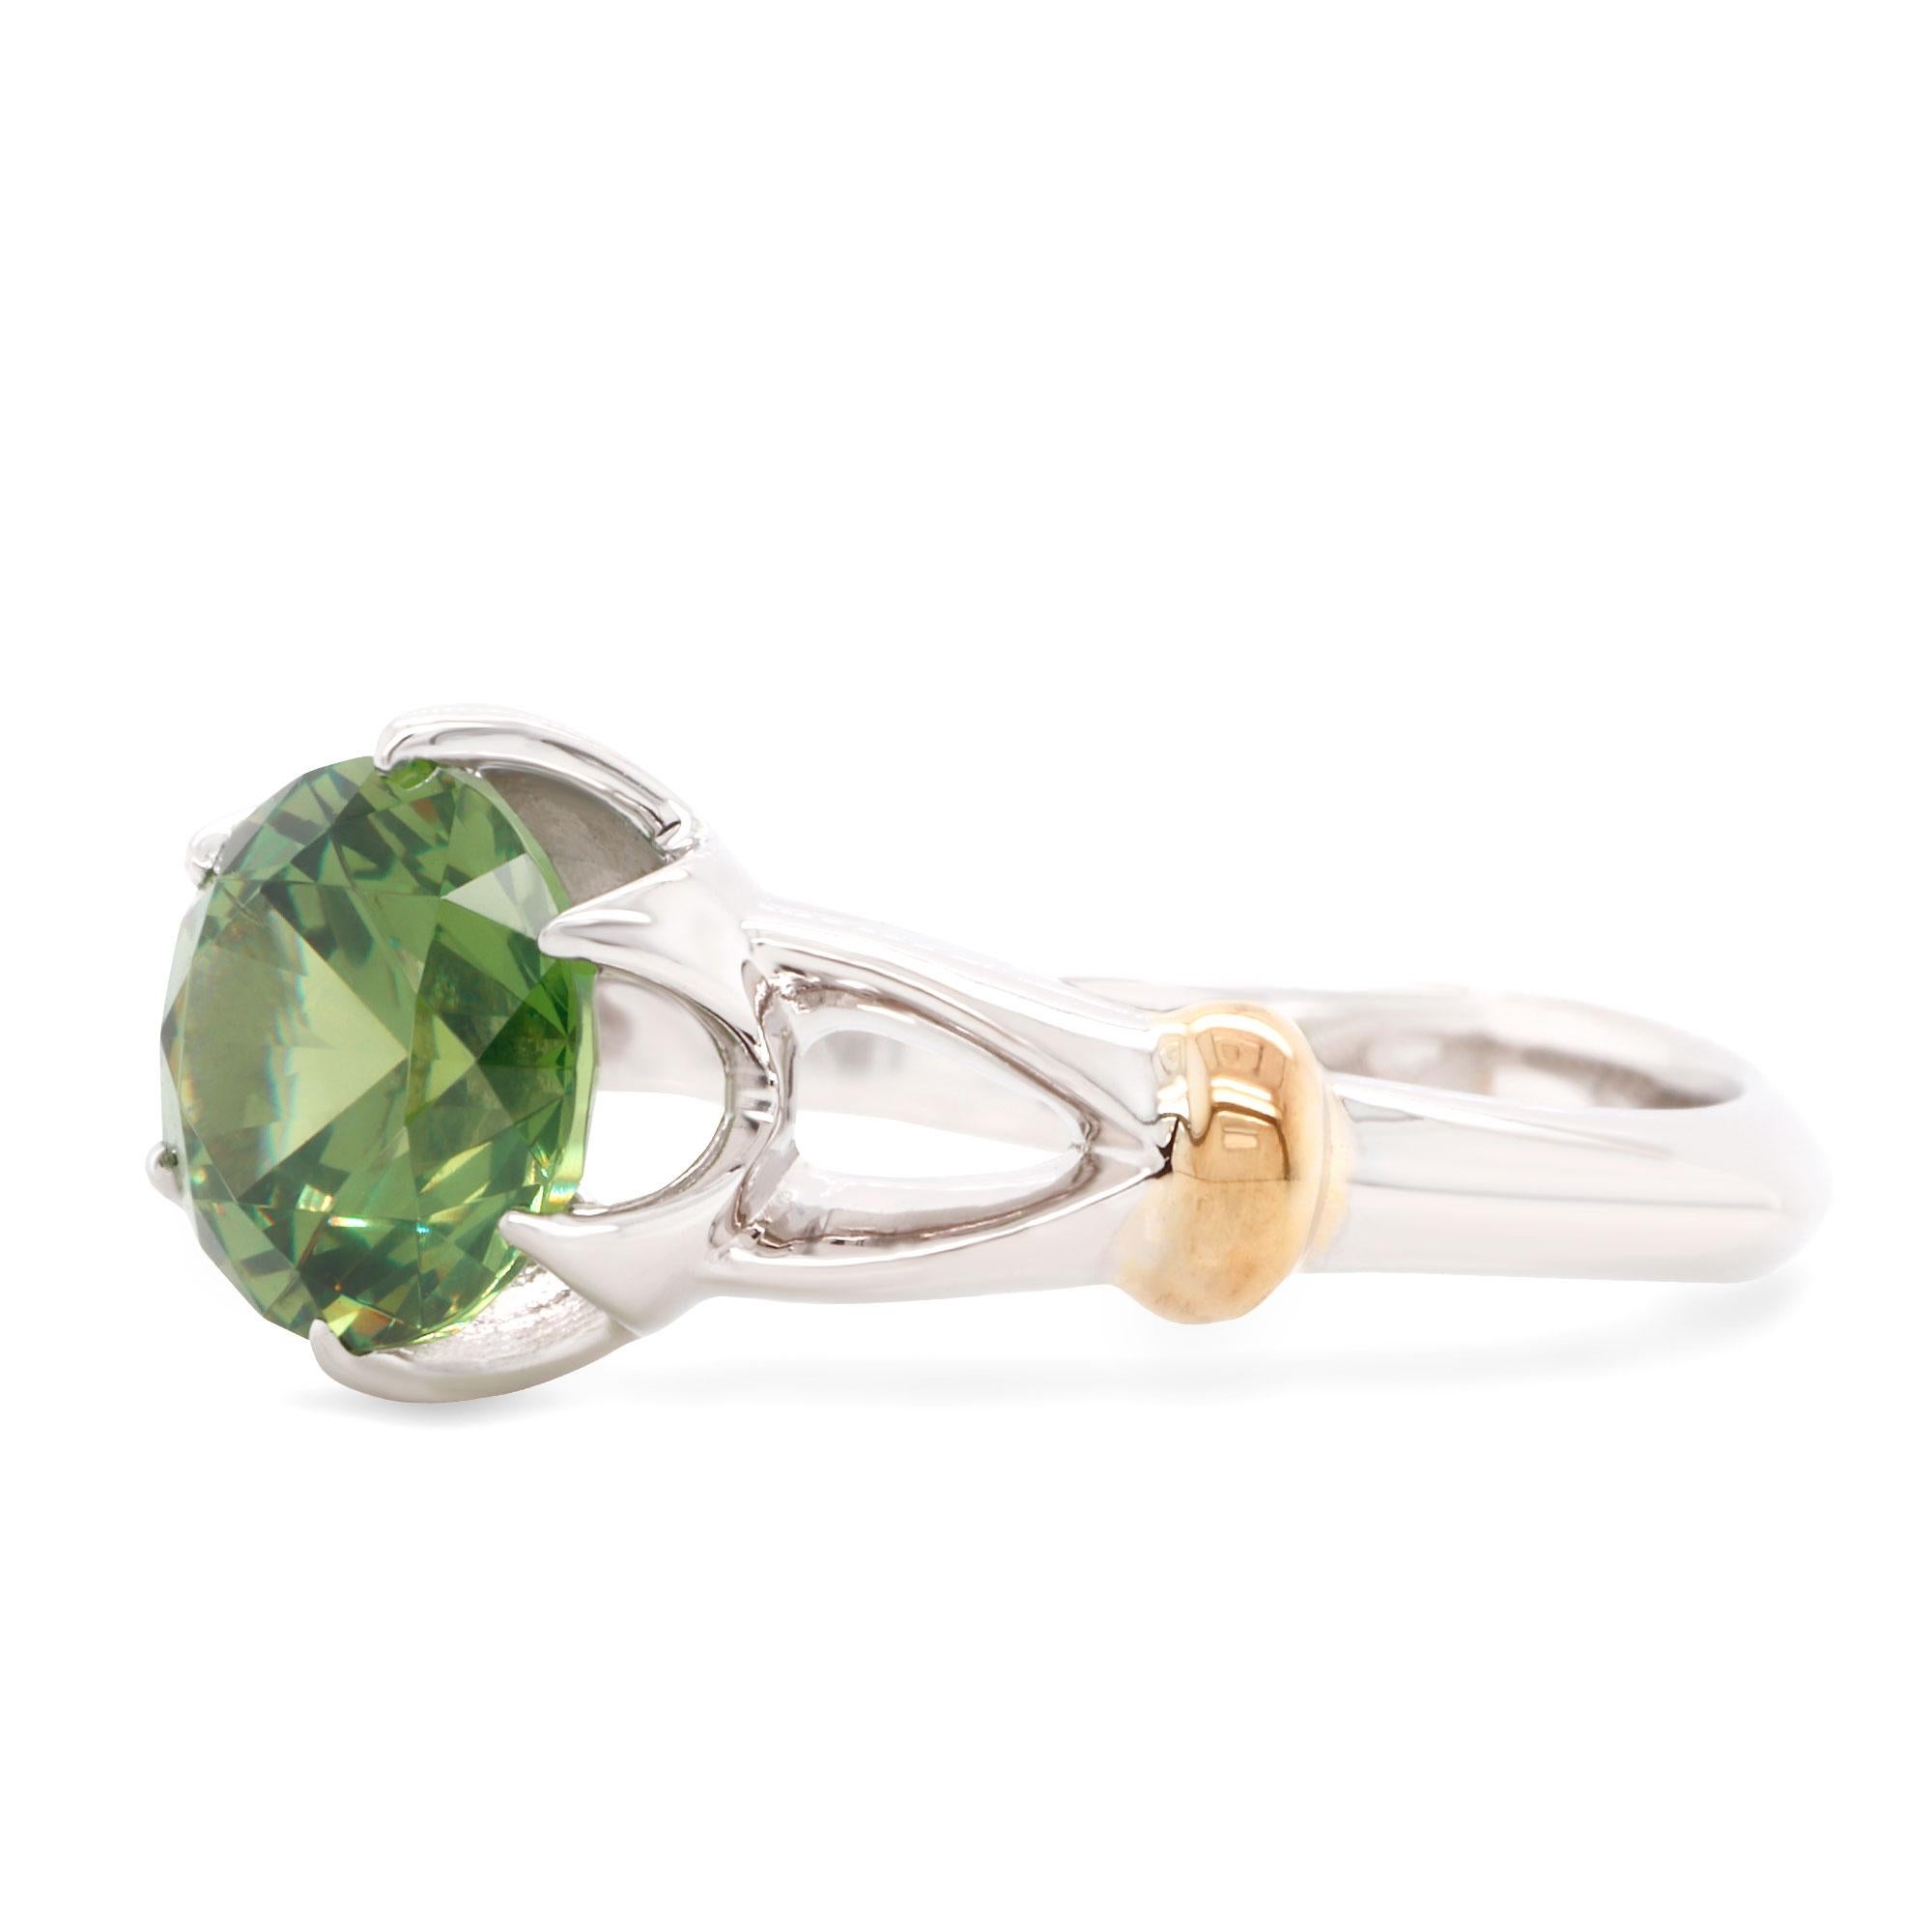 Elegant 14K White Gold Ring featuring 2.02 ct of top quality Russian Demantoid. Intricate design makes it perfect as for special occasion as for everyday wear, it can be used as wedding or engagement ring.
Ring size can be adjusted to any finger